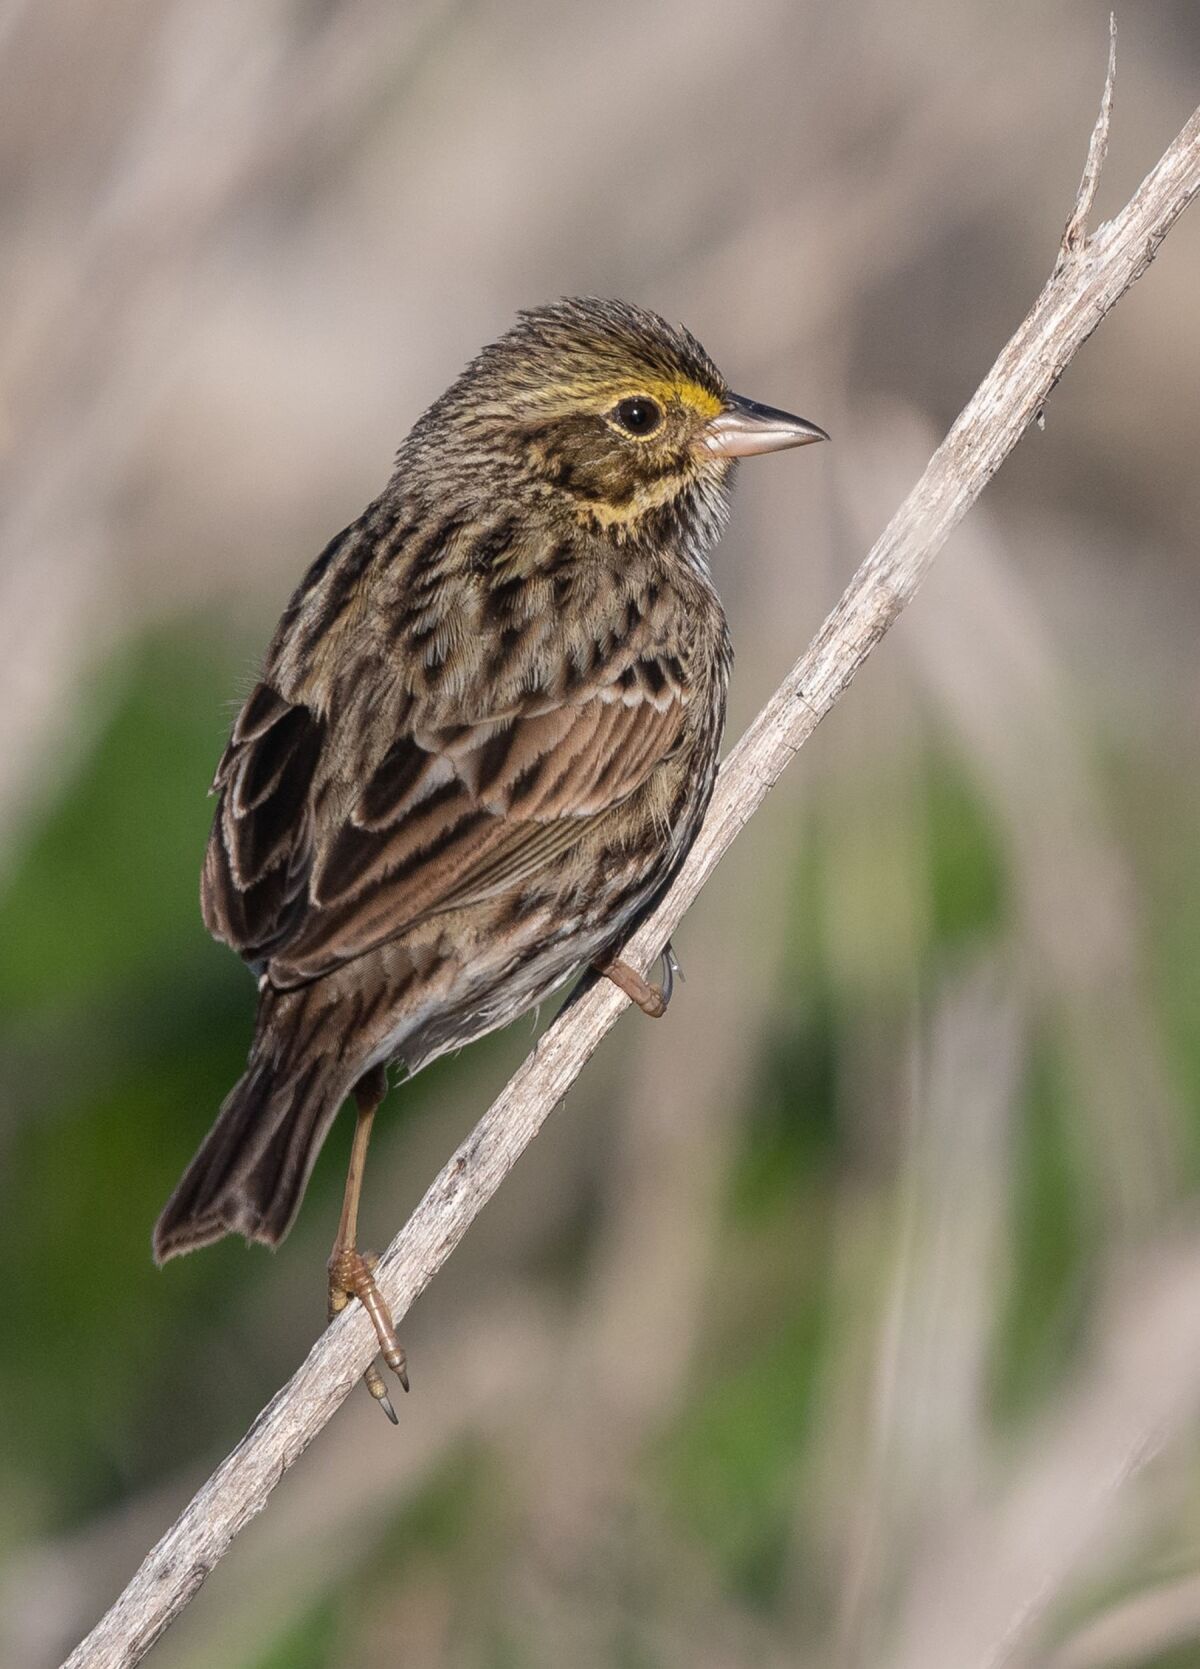 Belding’s savannah sparrow make their home in Kendall Frost Marsh; the species is endangered.